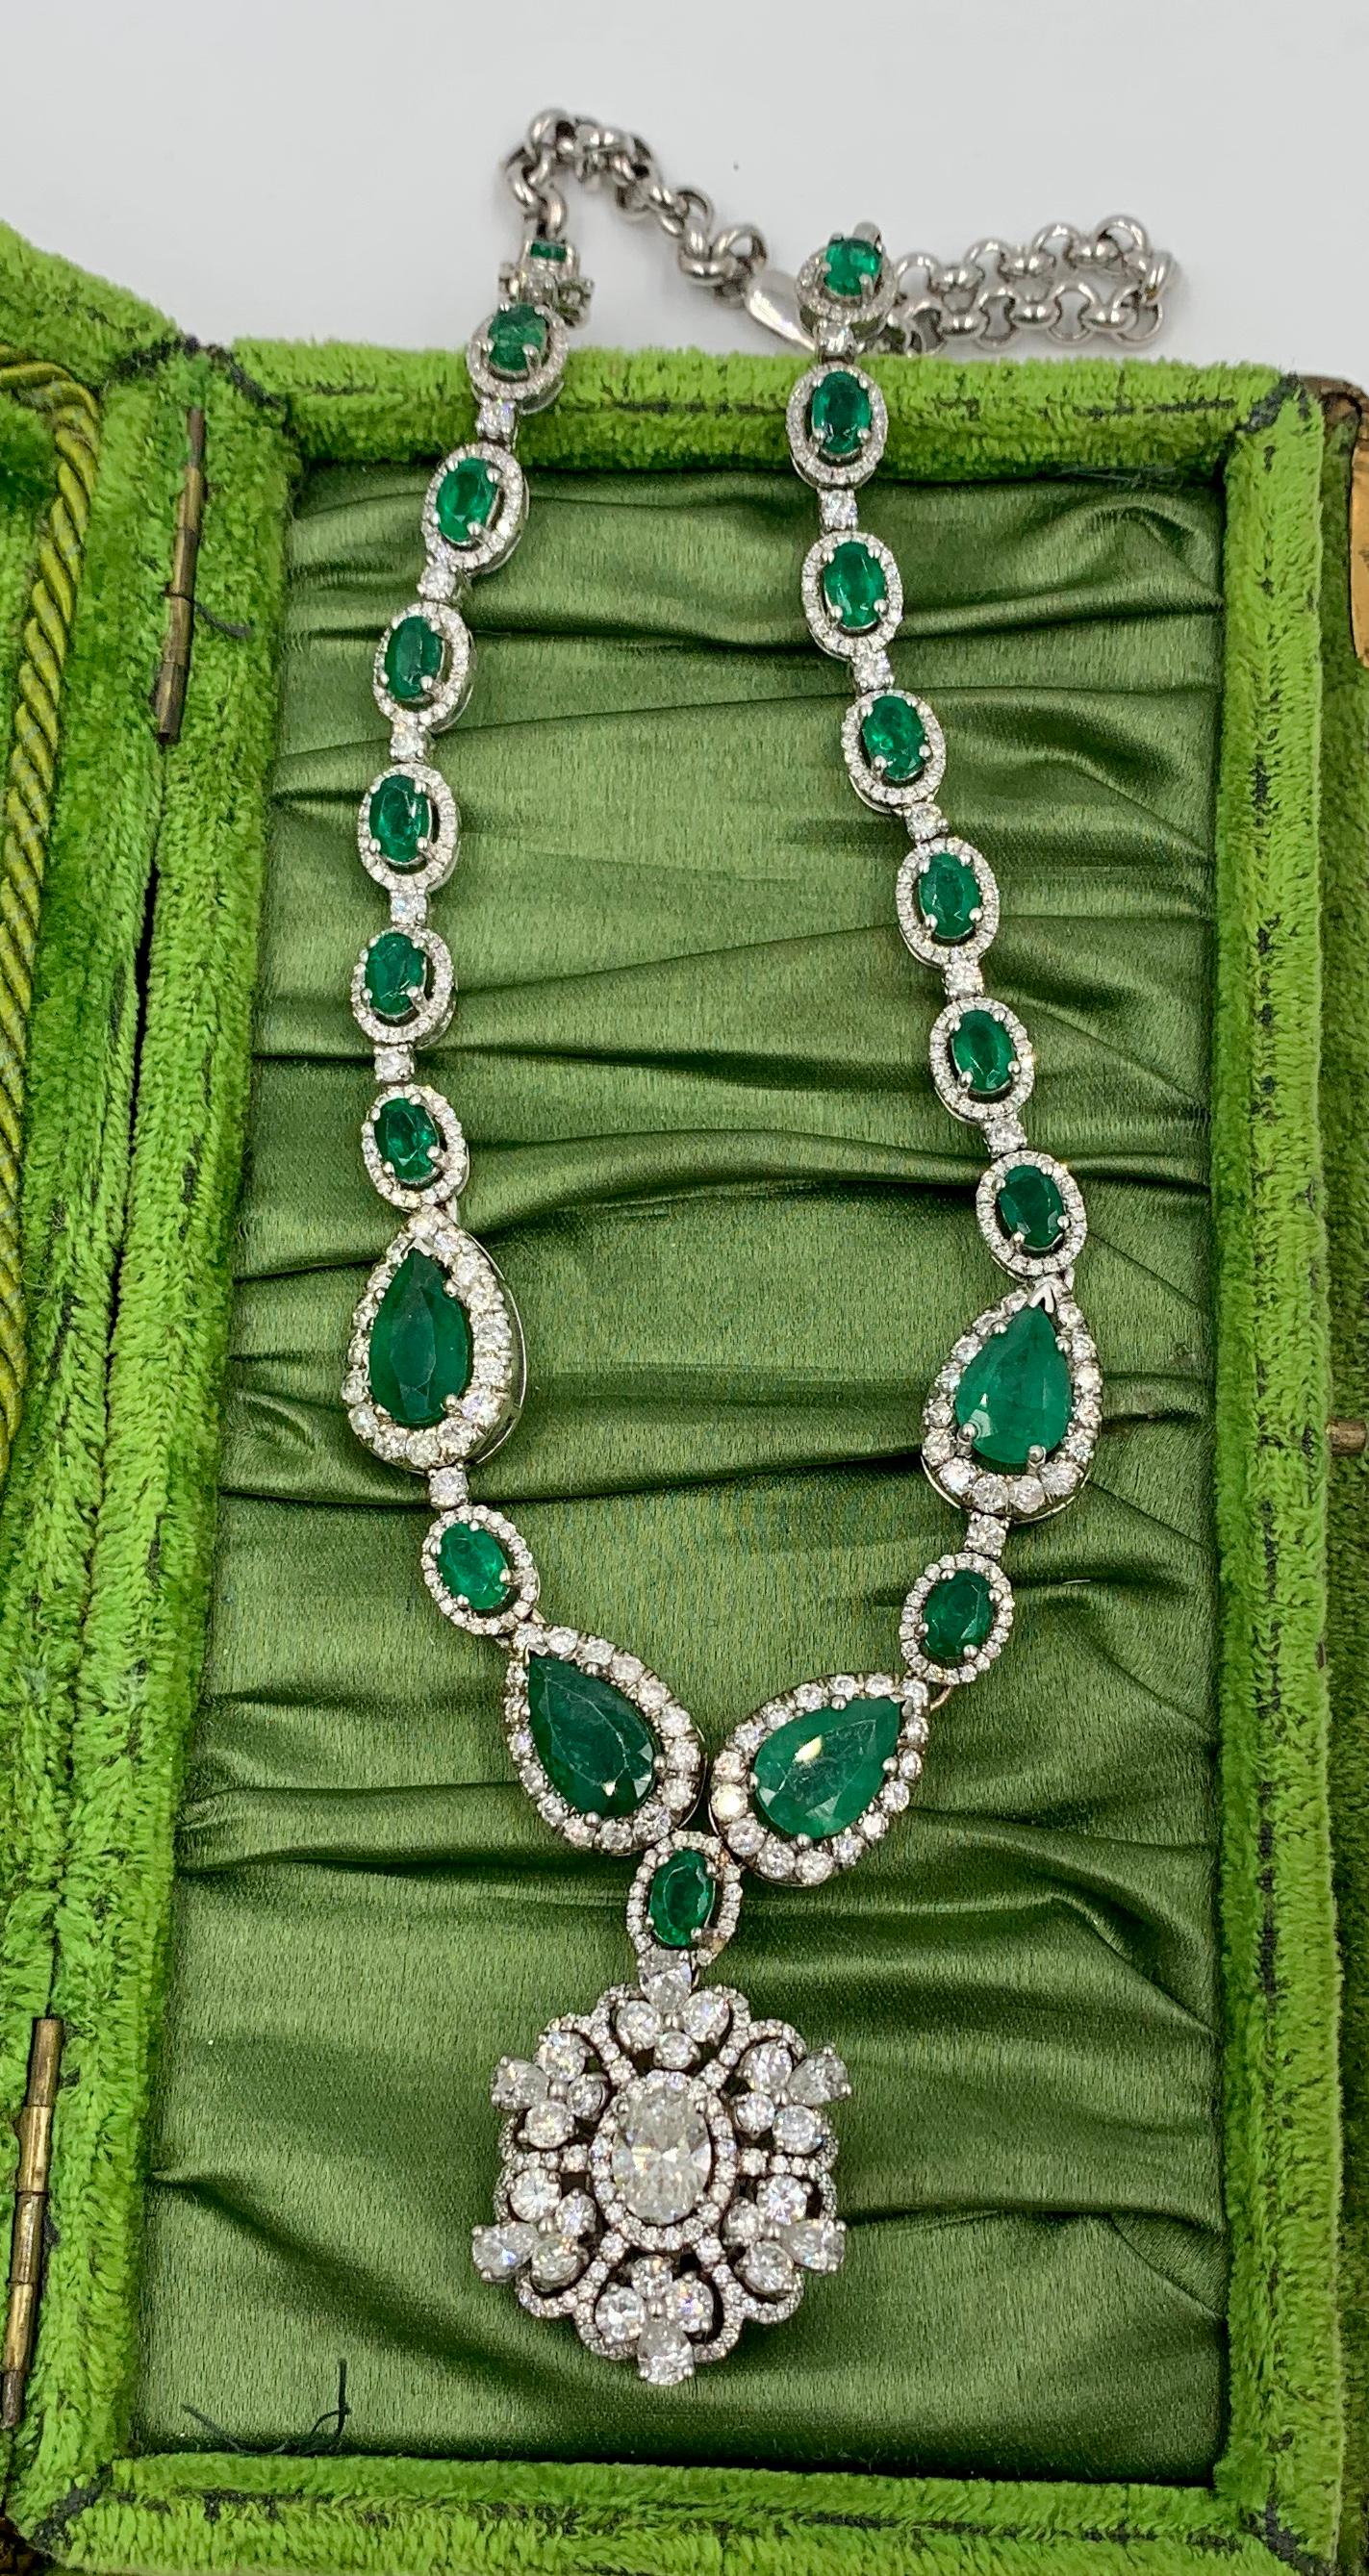 17.6 Carat Emerald 6.3 Carat Diamond Pendant Necklace Antique Estate Gold In Excellent Condition For Sale In New York, NY